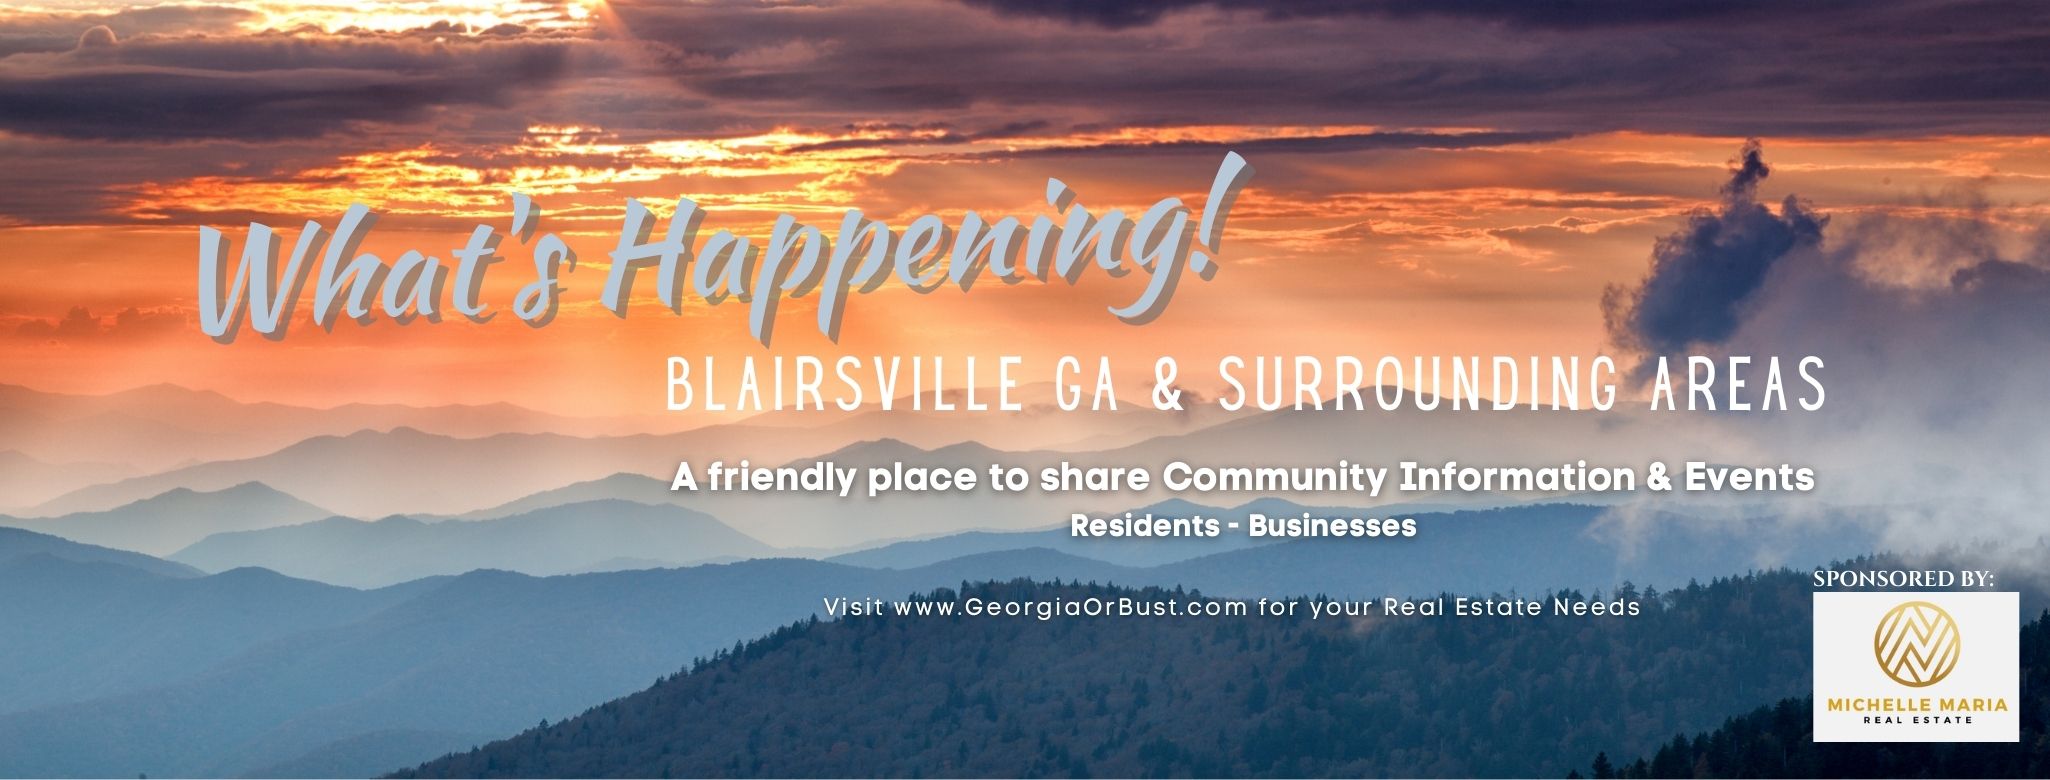 What's Happening Blairsville Facebook Group by Michelle Maria Real Estate serving the North Georgia Mountains